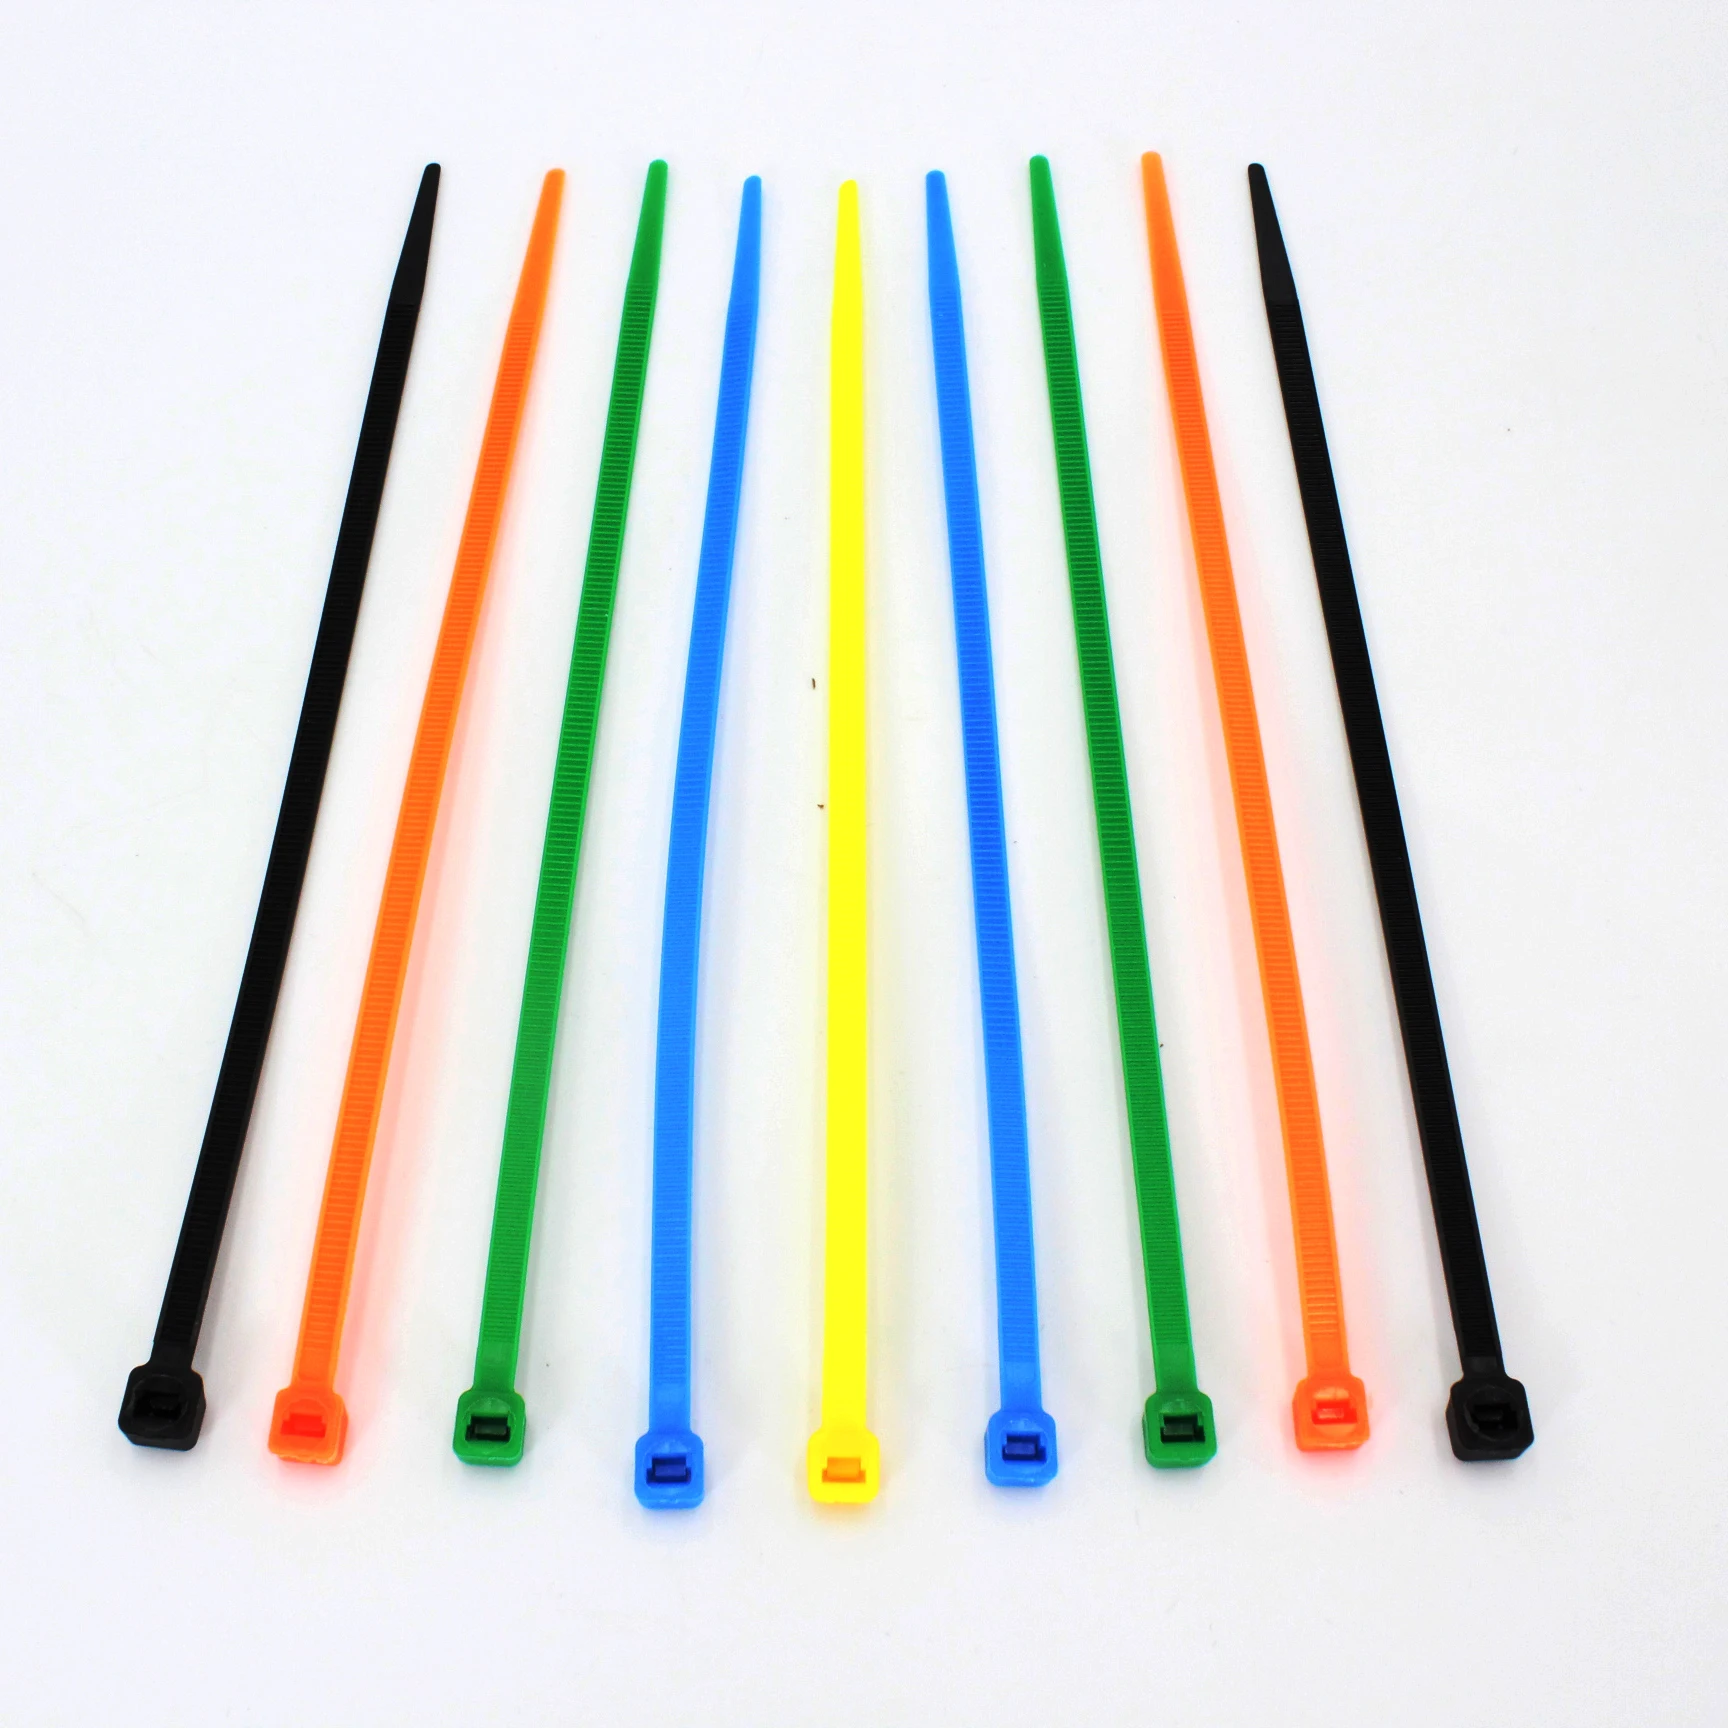 Customized Colors are Accepted Cable Ties Made of Nylon 66